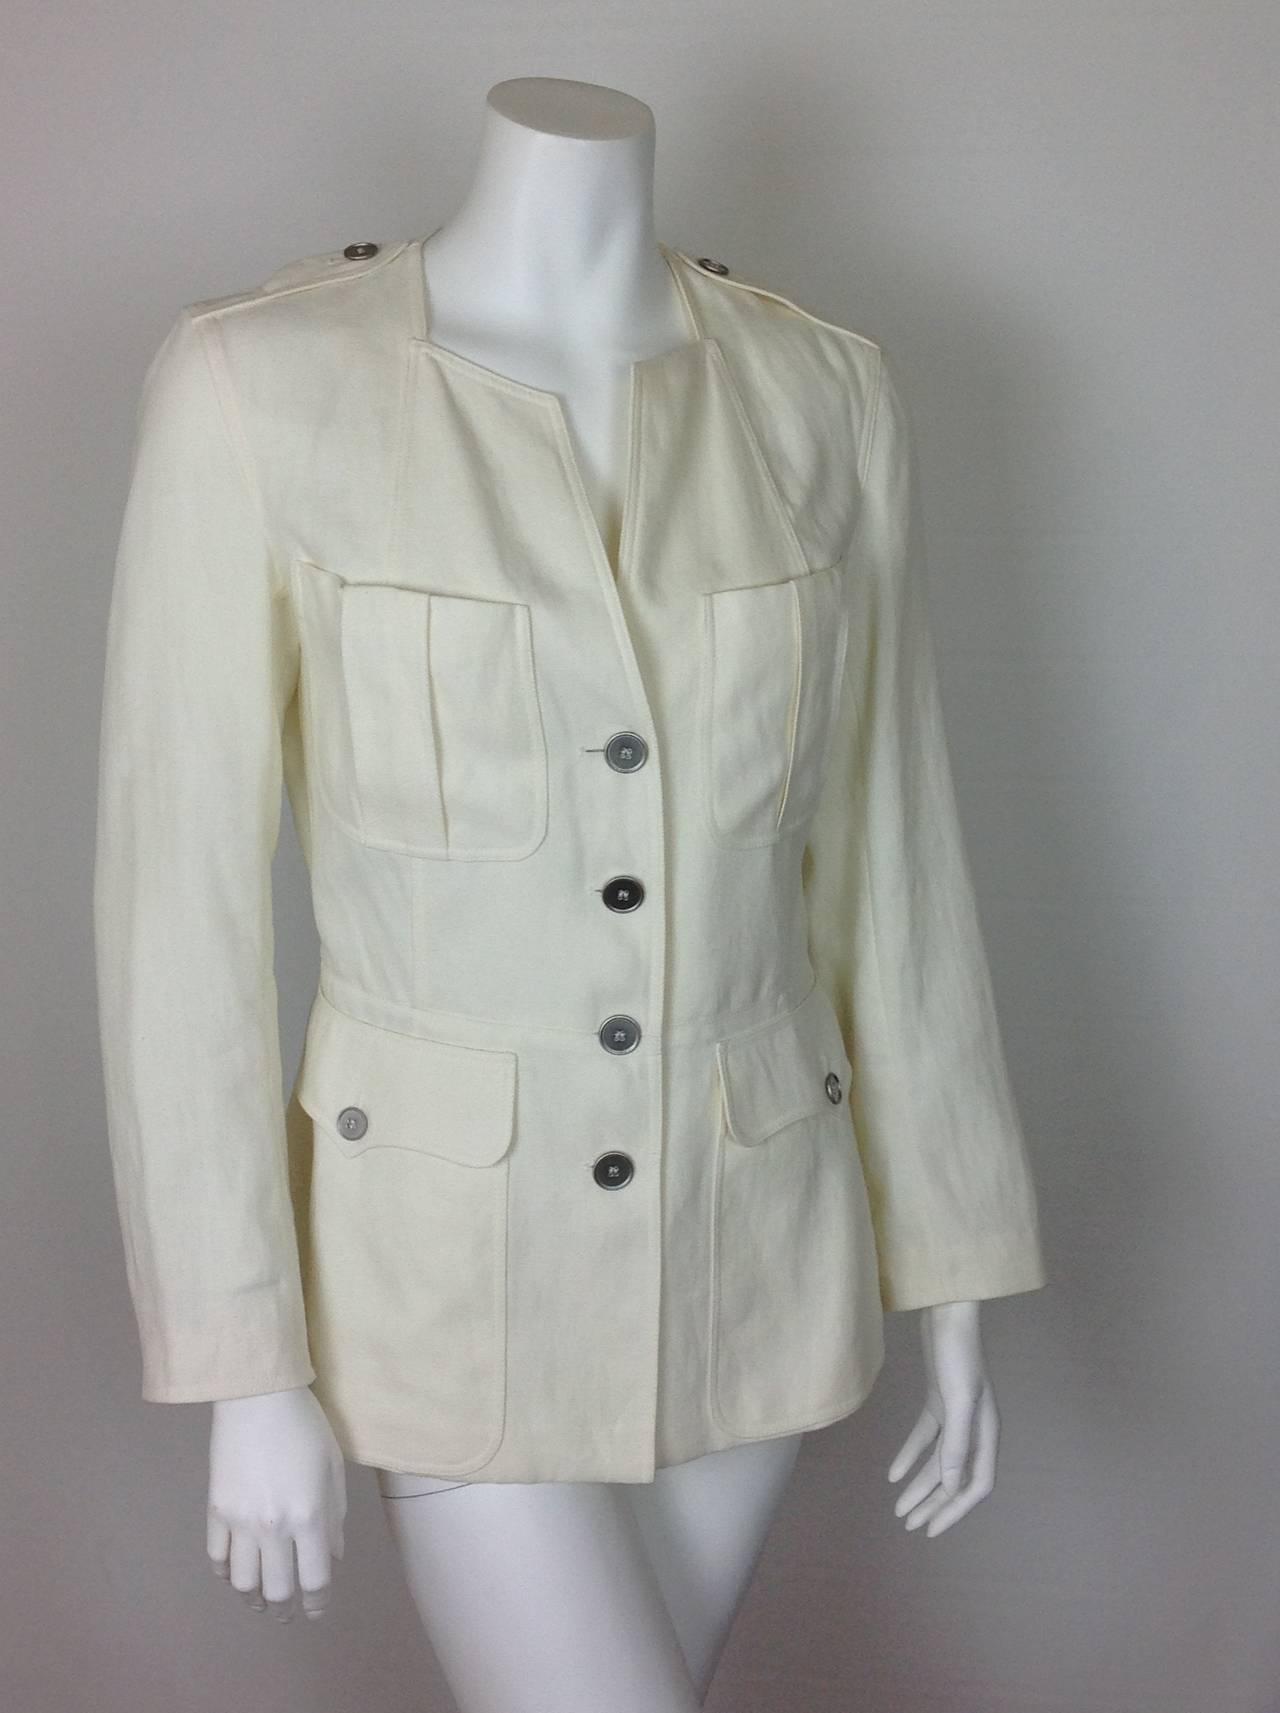 Unworn heavy cream linen Hermes safari jacket. Just beautiful!
This lovely jacket has everything...epaulettes, 2 envelope pockets over the breast, 2 buttoned envelope pockets on the hip.
Half belted back, with a single 6.75